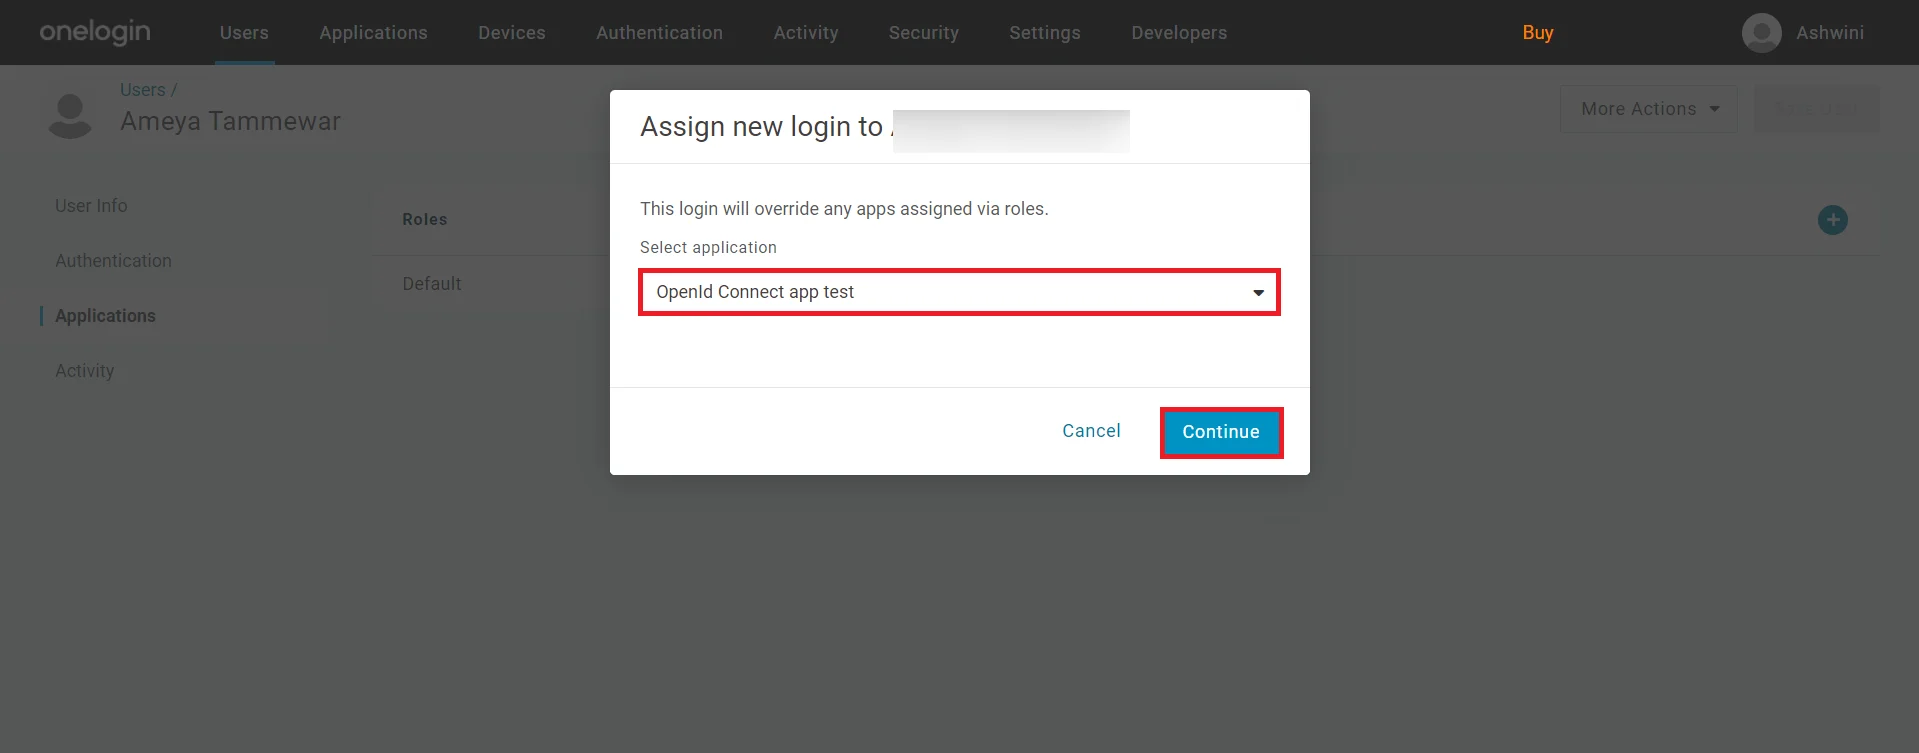 Secure Access with OneLogin Single Sign-On (SSO) Magento OneLogin allow SSO